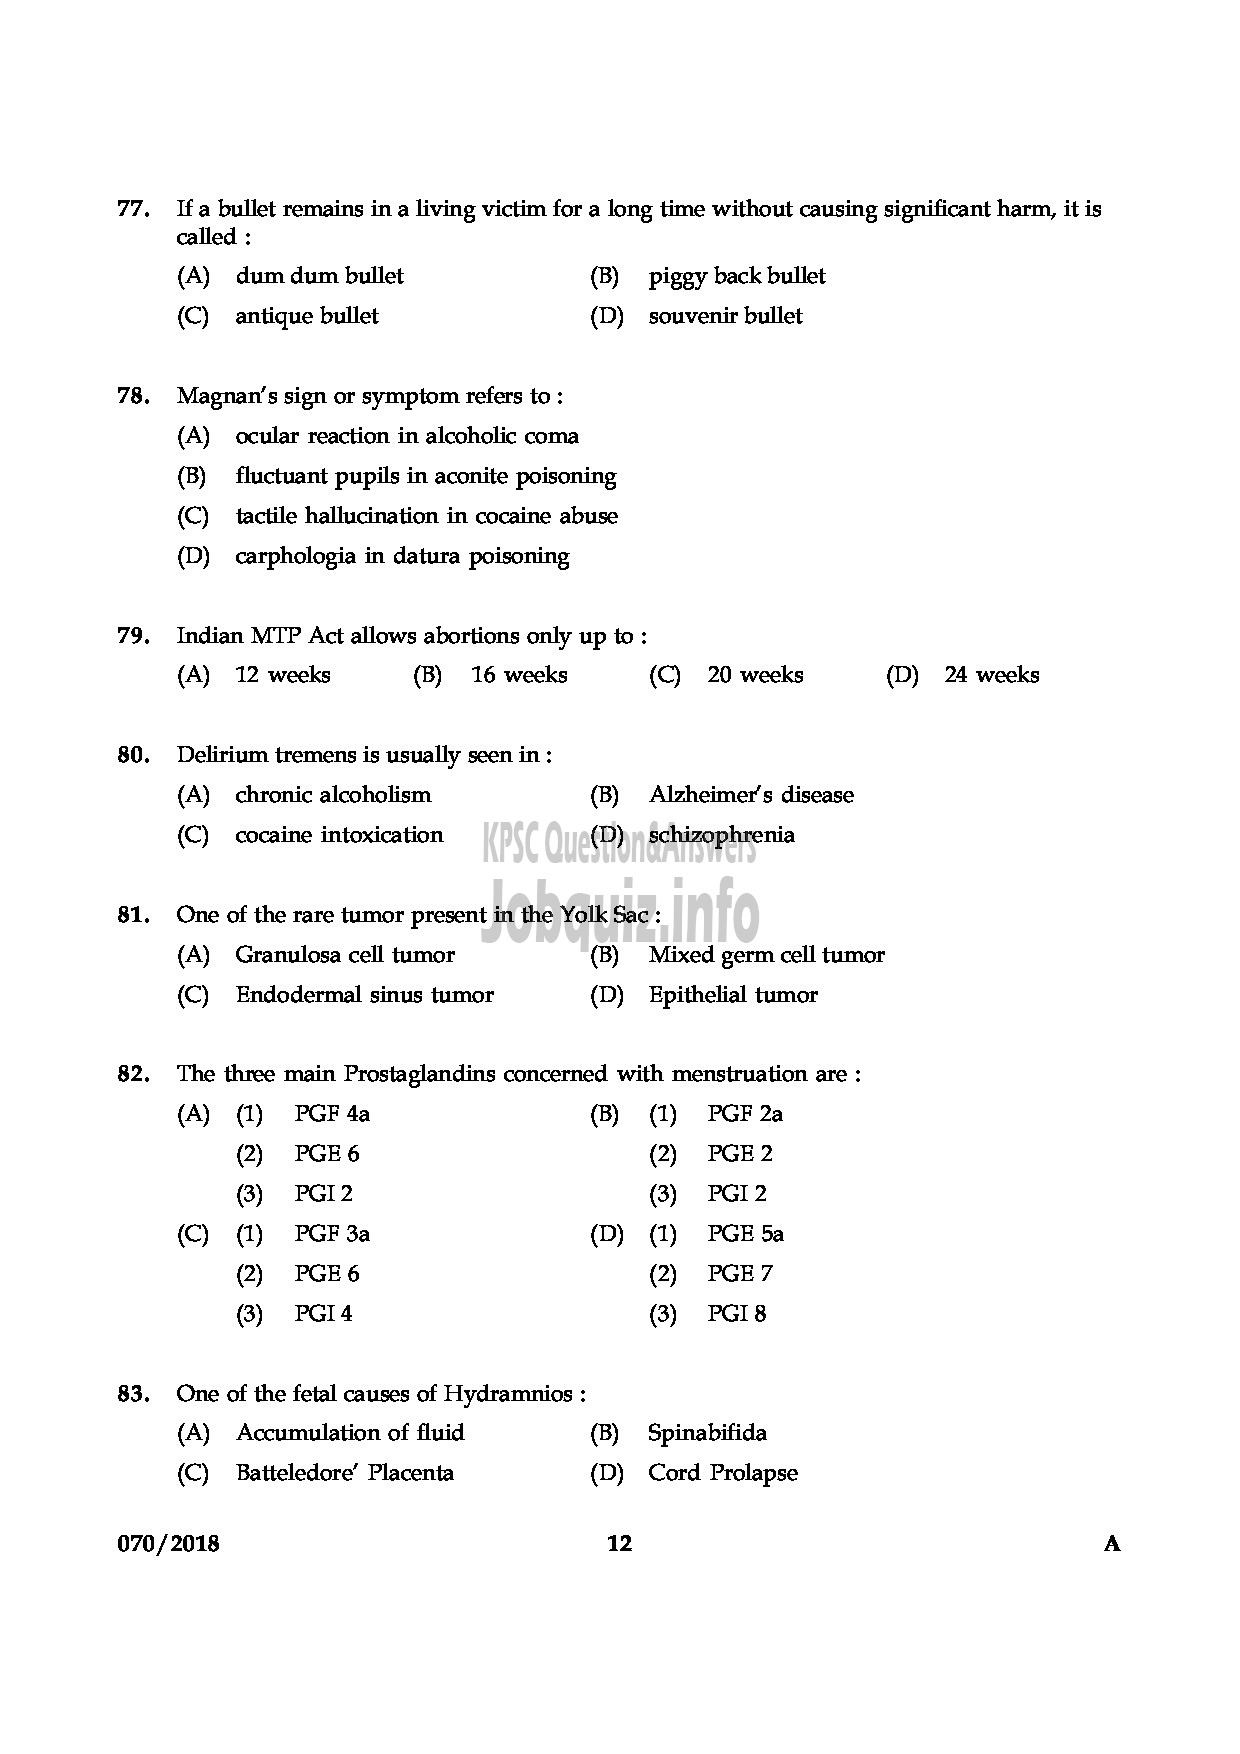 Kerala PSC Question Paper - MEDICAL OFFICER HOMOEO/ ASSISTANT INSURANCE MEDICAL OFFICER HOMOEO HOMOEOPATHY/ INSURANCE MEDICAL SERVICES-12